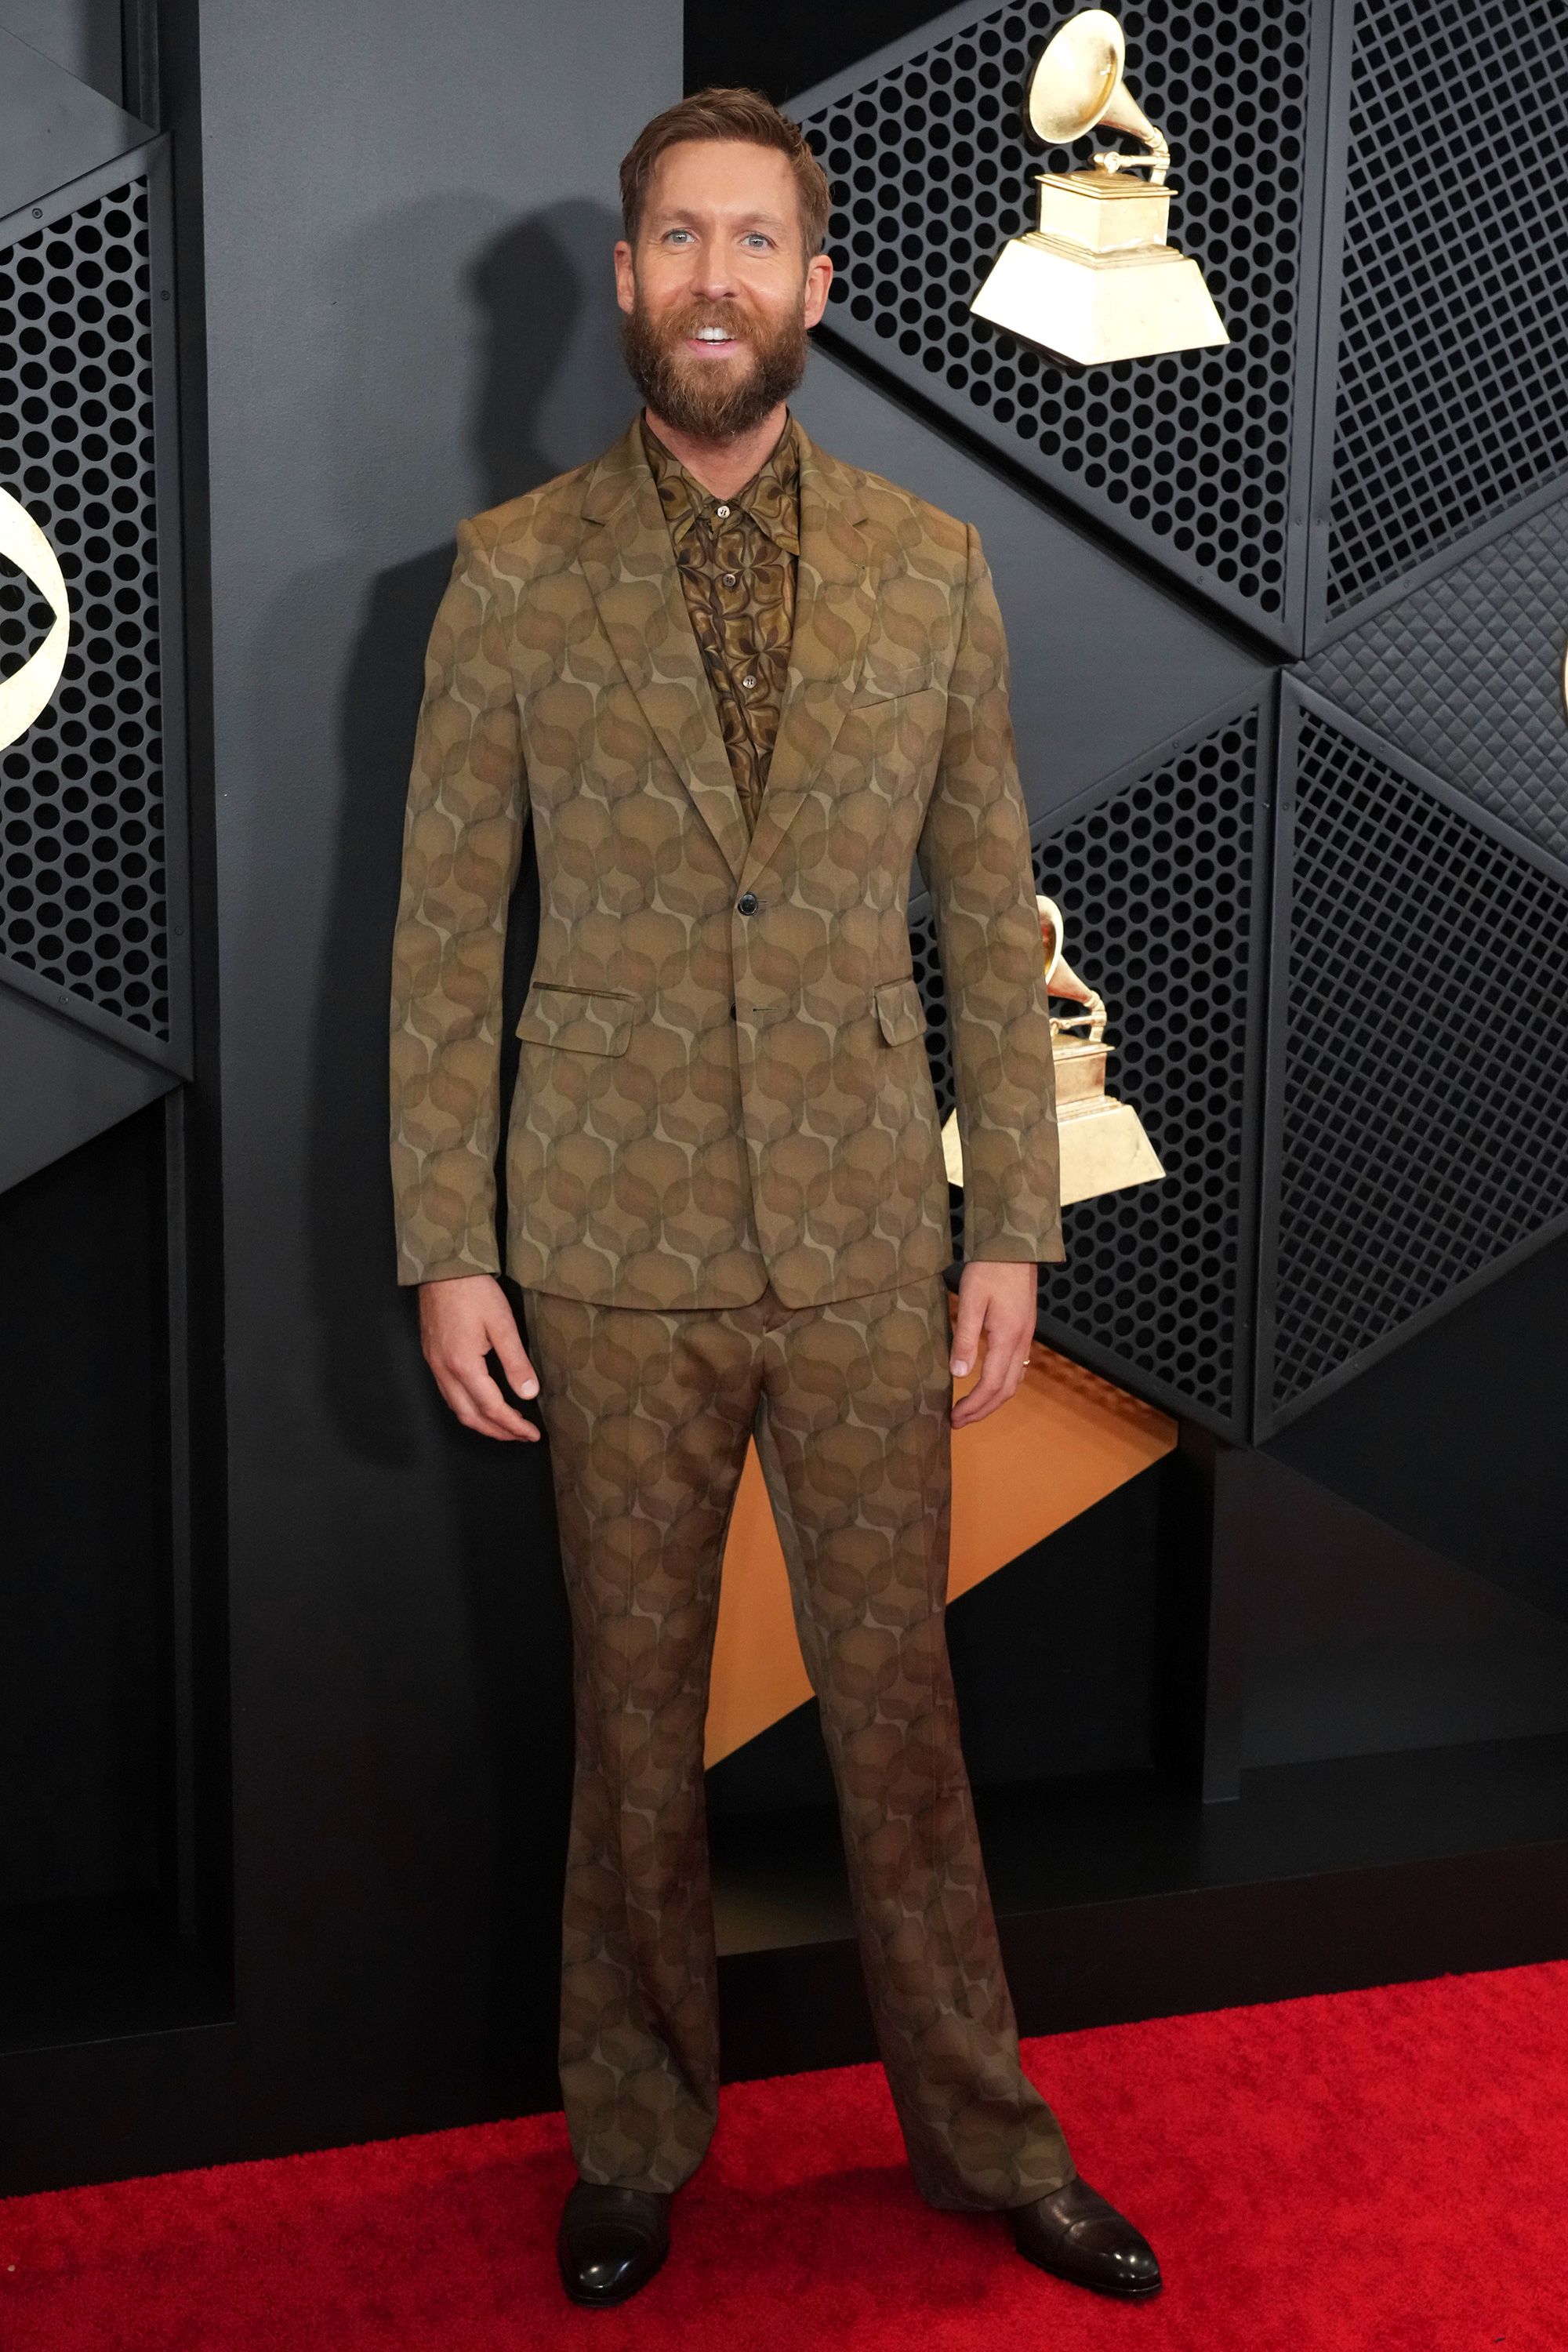 Calvin Harris, nominated for his song “Miracle” looked dapper in a patterned suit.